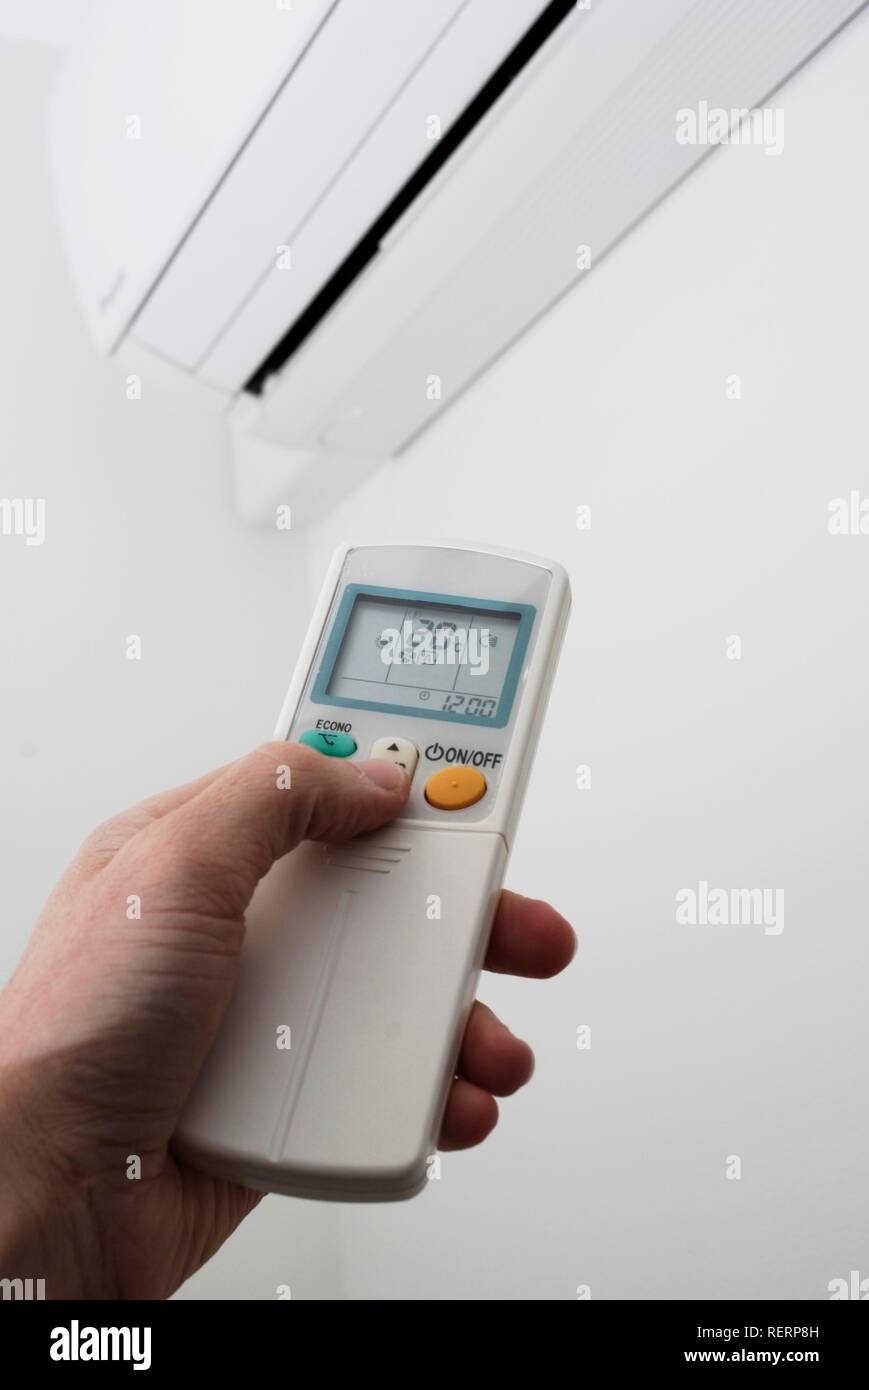 Hand adjusting the settings of a wall-mounted air conditioning unit with remote control Stock Photo